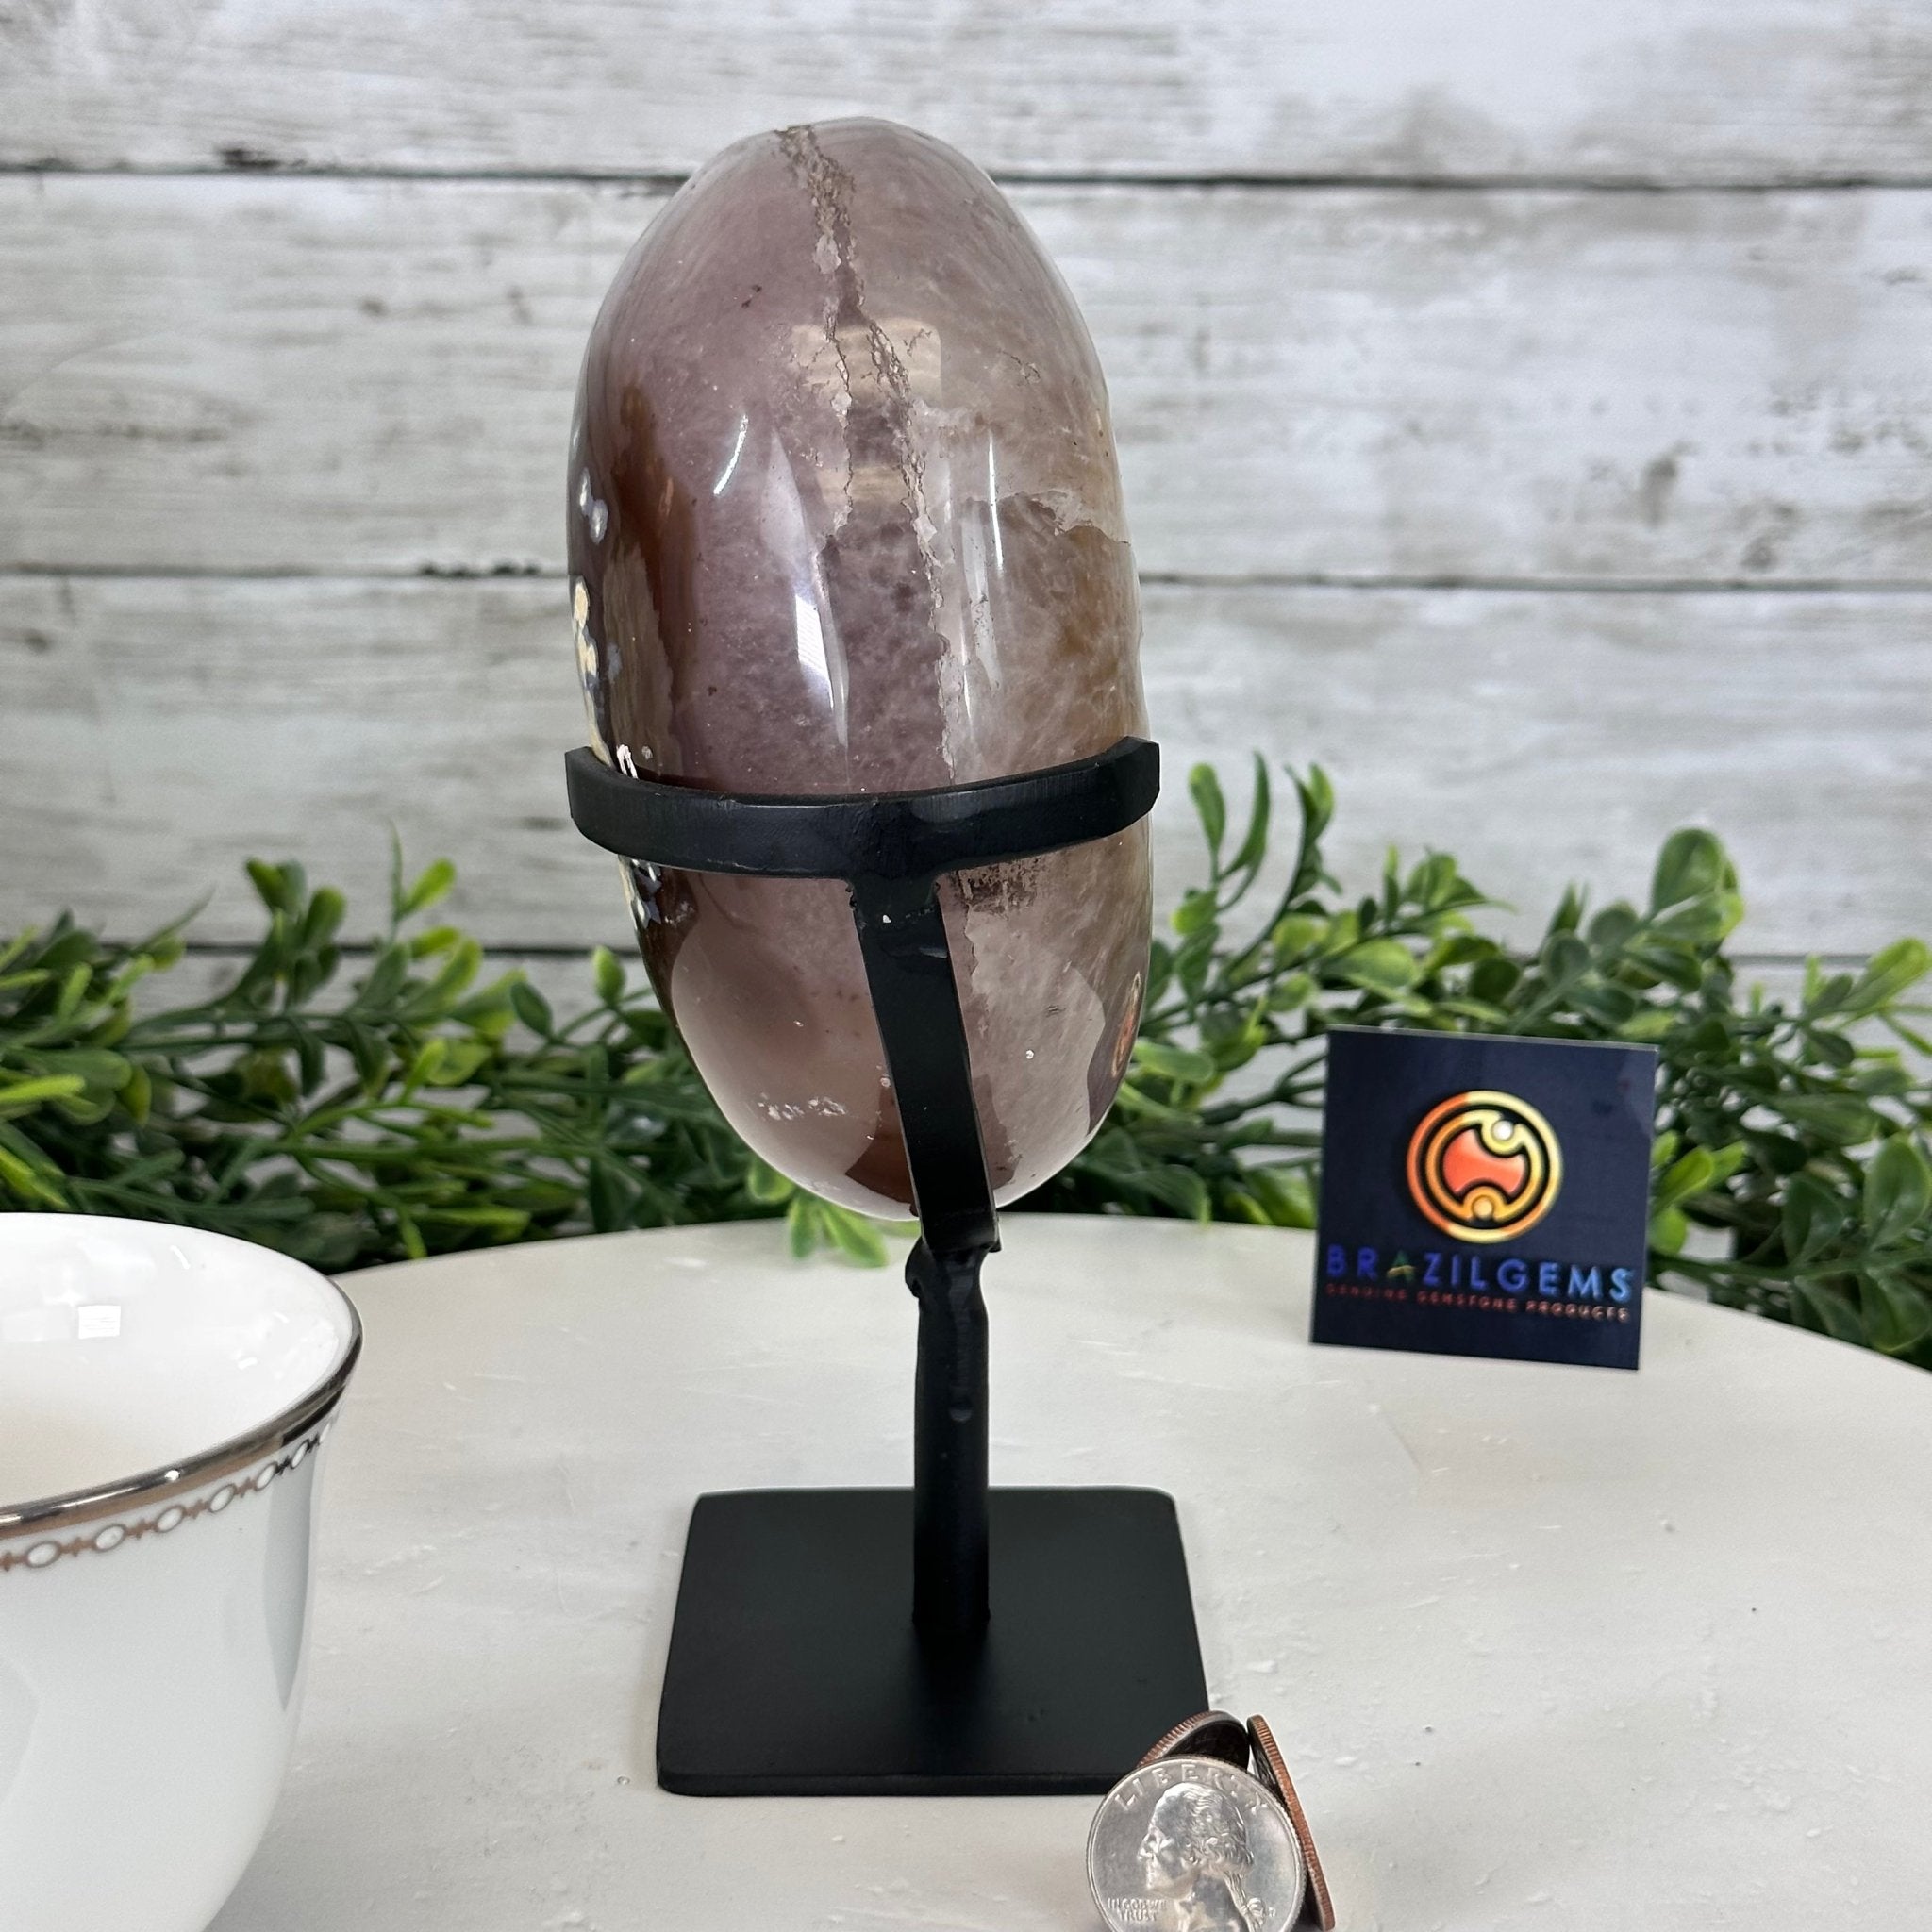 Polished Agate Crescent Moon on a Stand, 2.7 lbs & 7.75" Tall #5740NA-001 - Brazil GemsBrazil GemsPolished Agate Crescent Moon on a Stand, 2.7 lbs & 7.75" Tall #5740NA-001Crescent Moons5740NA-001